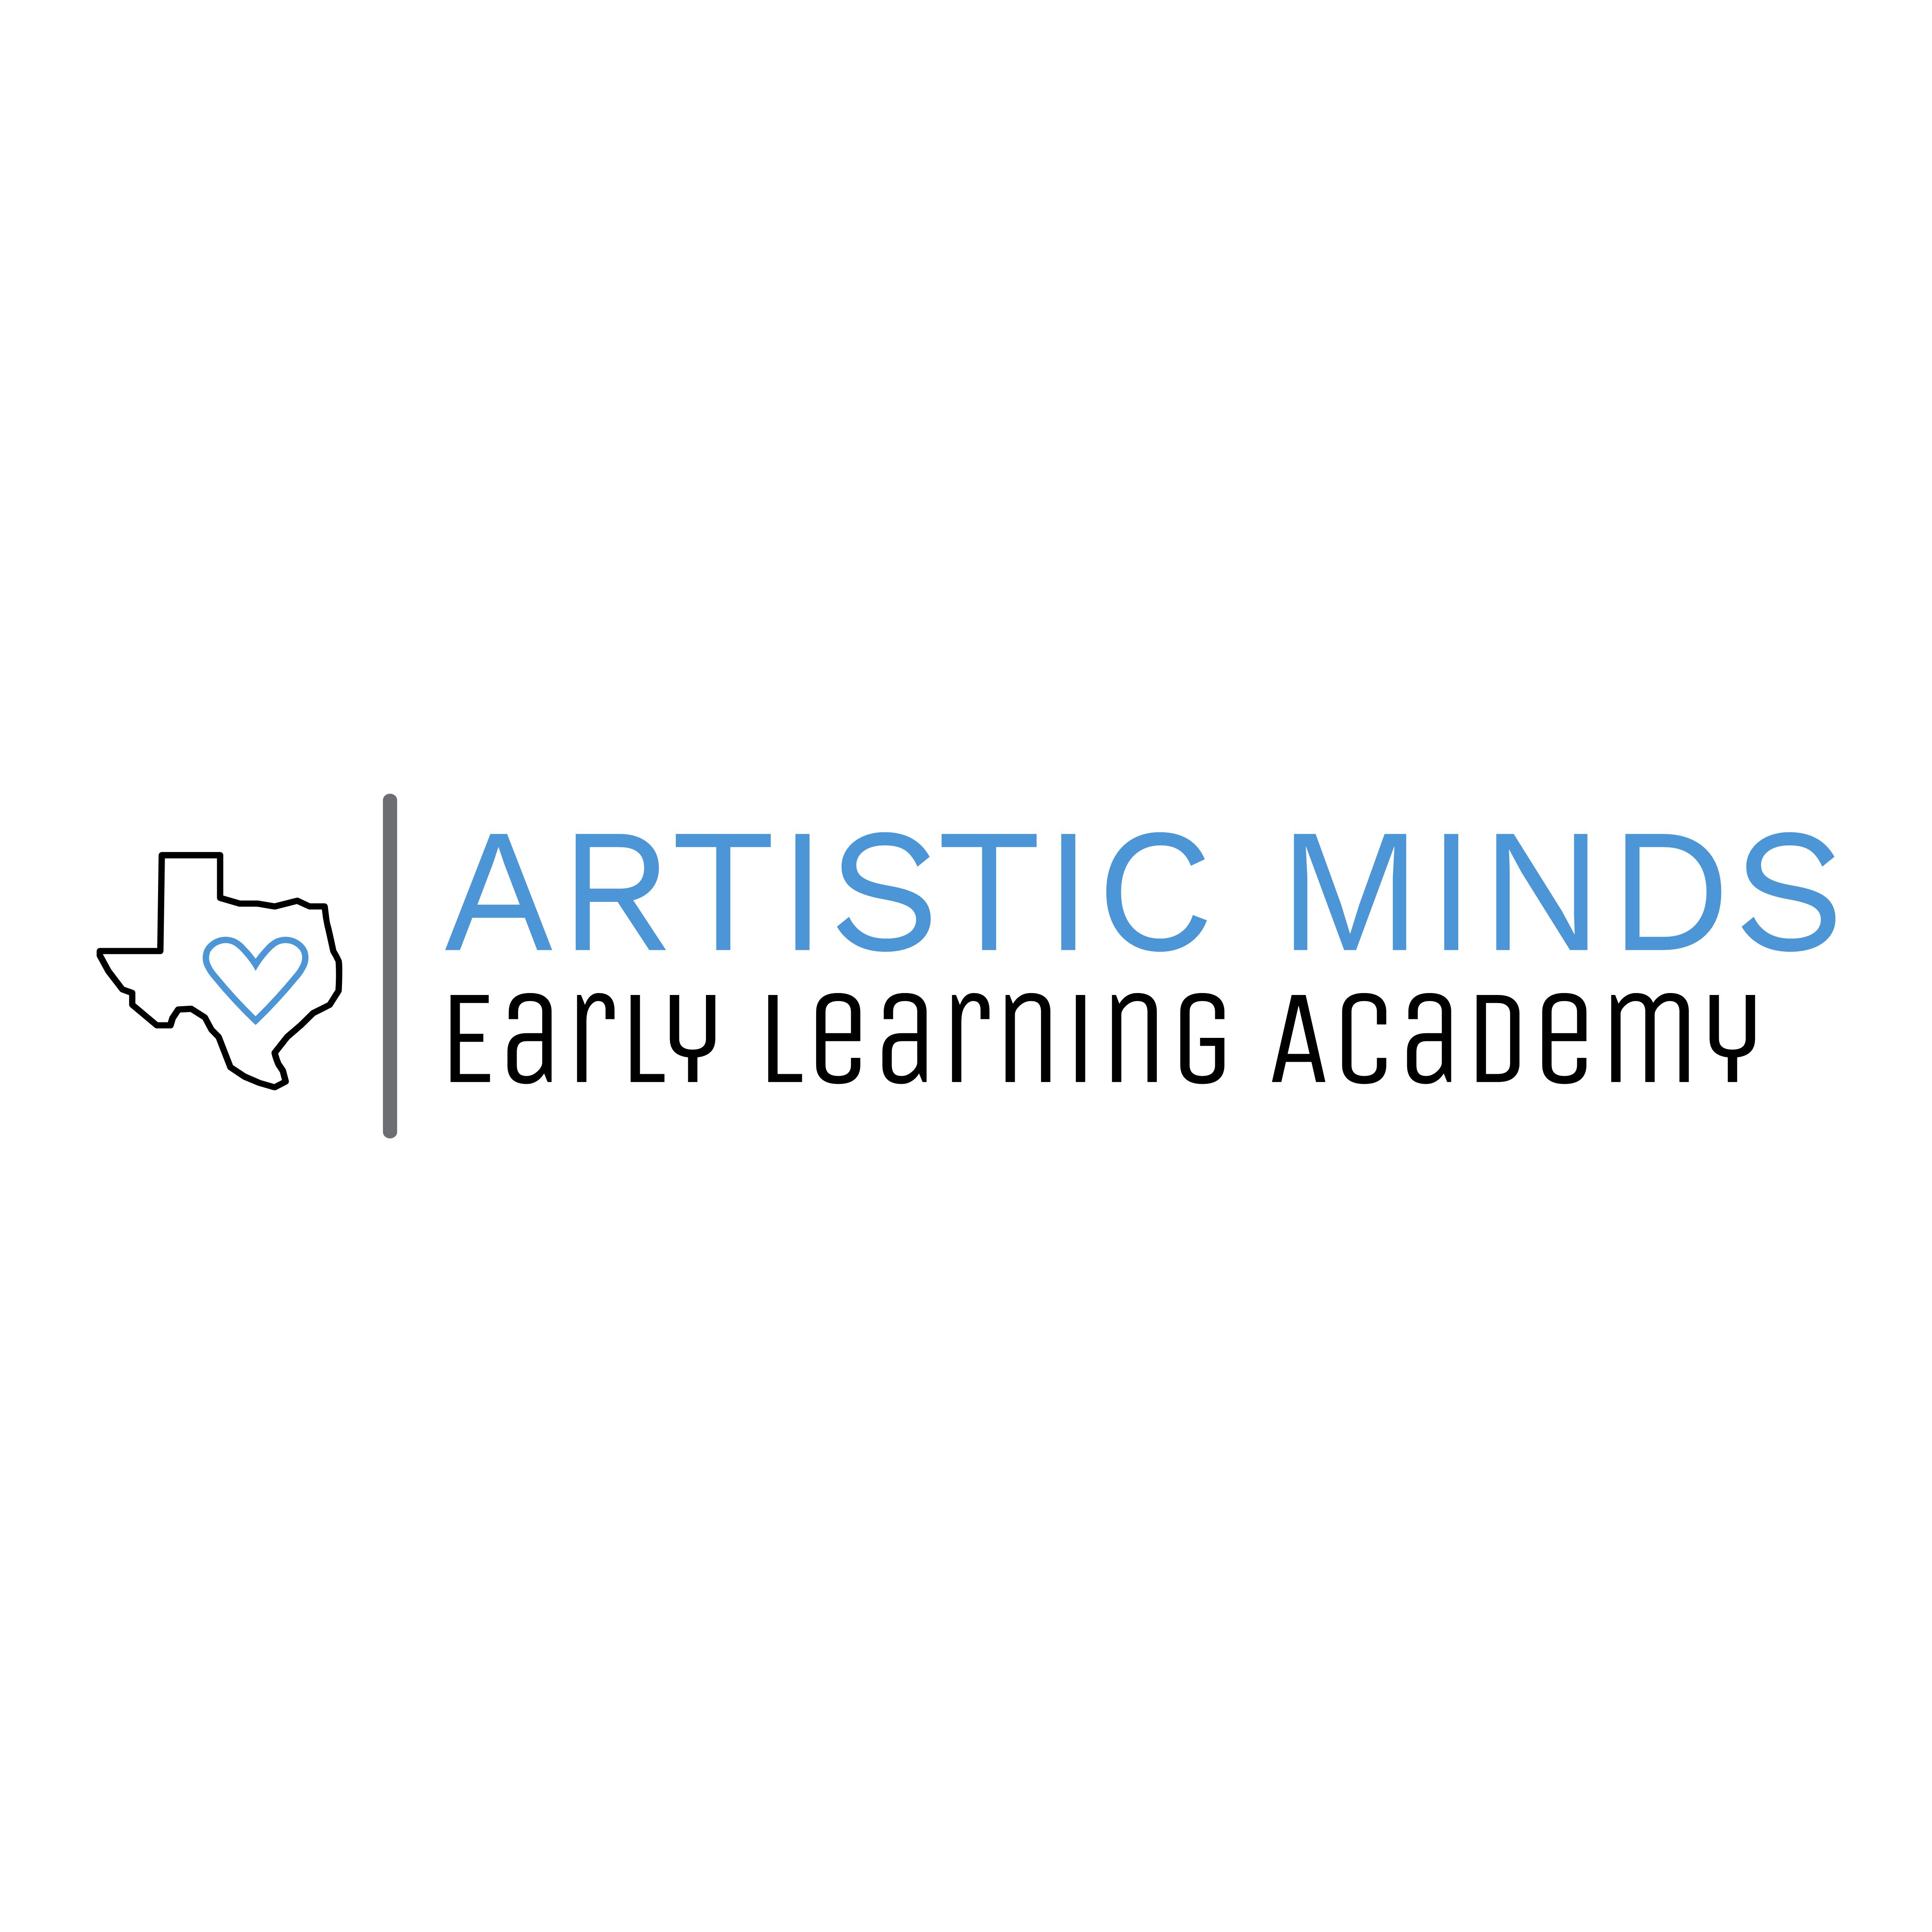 Artistic Minds Early Learning Academy